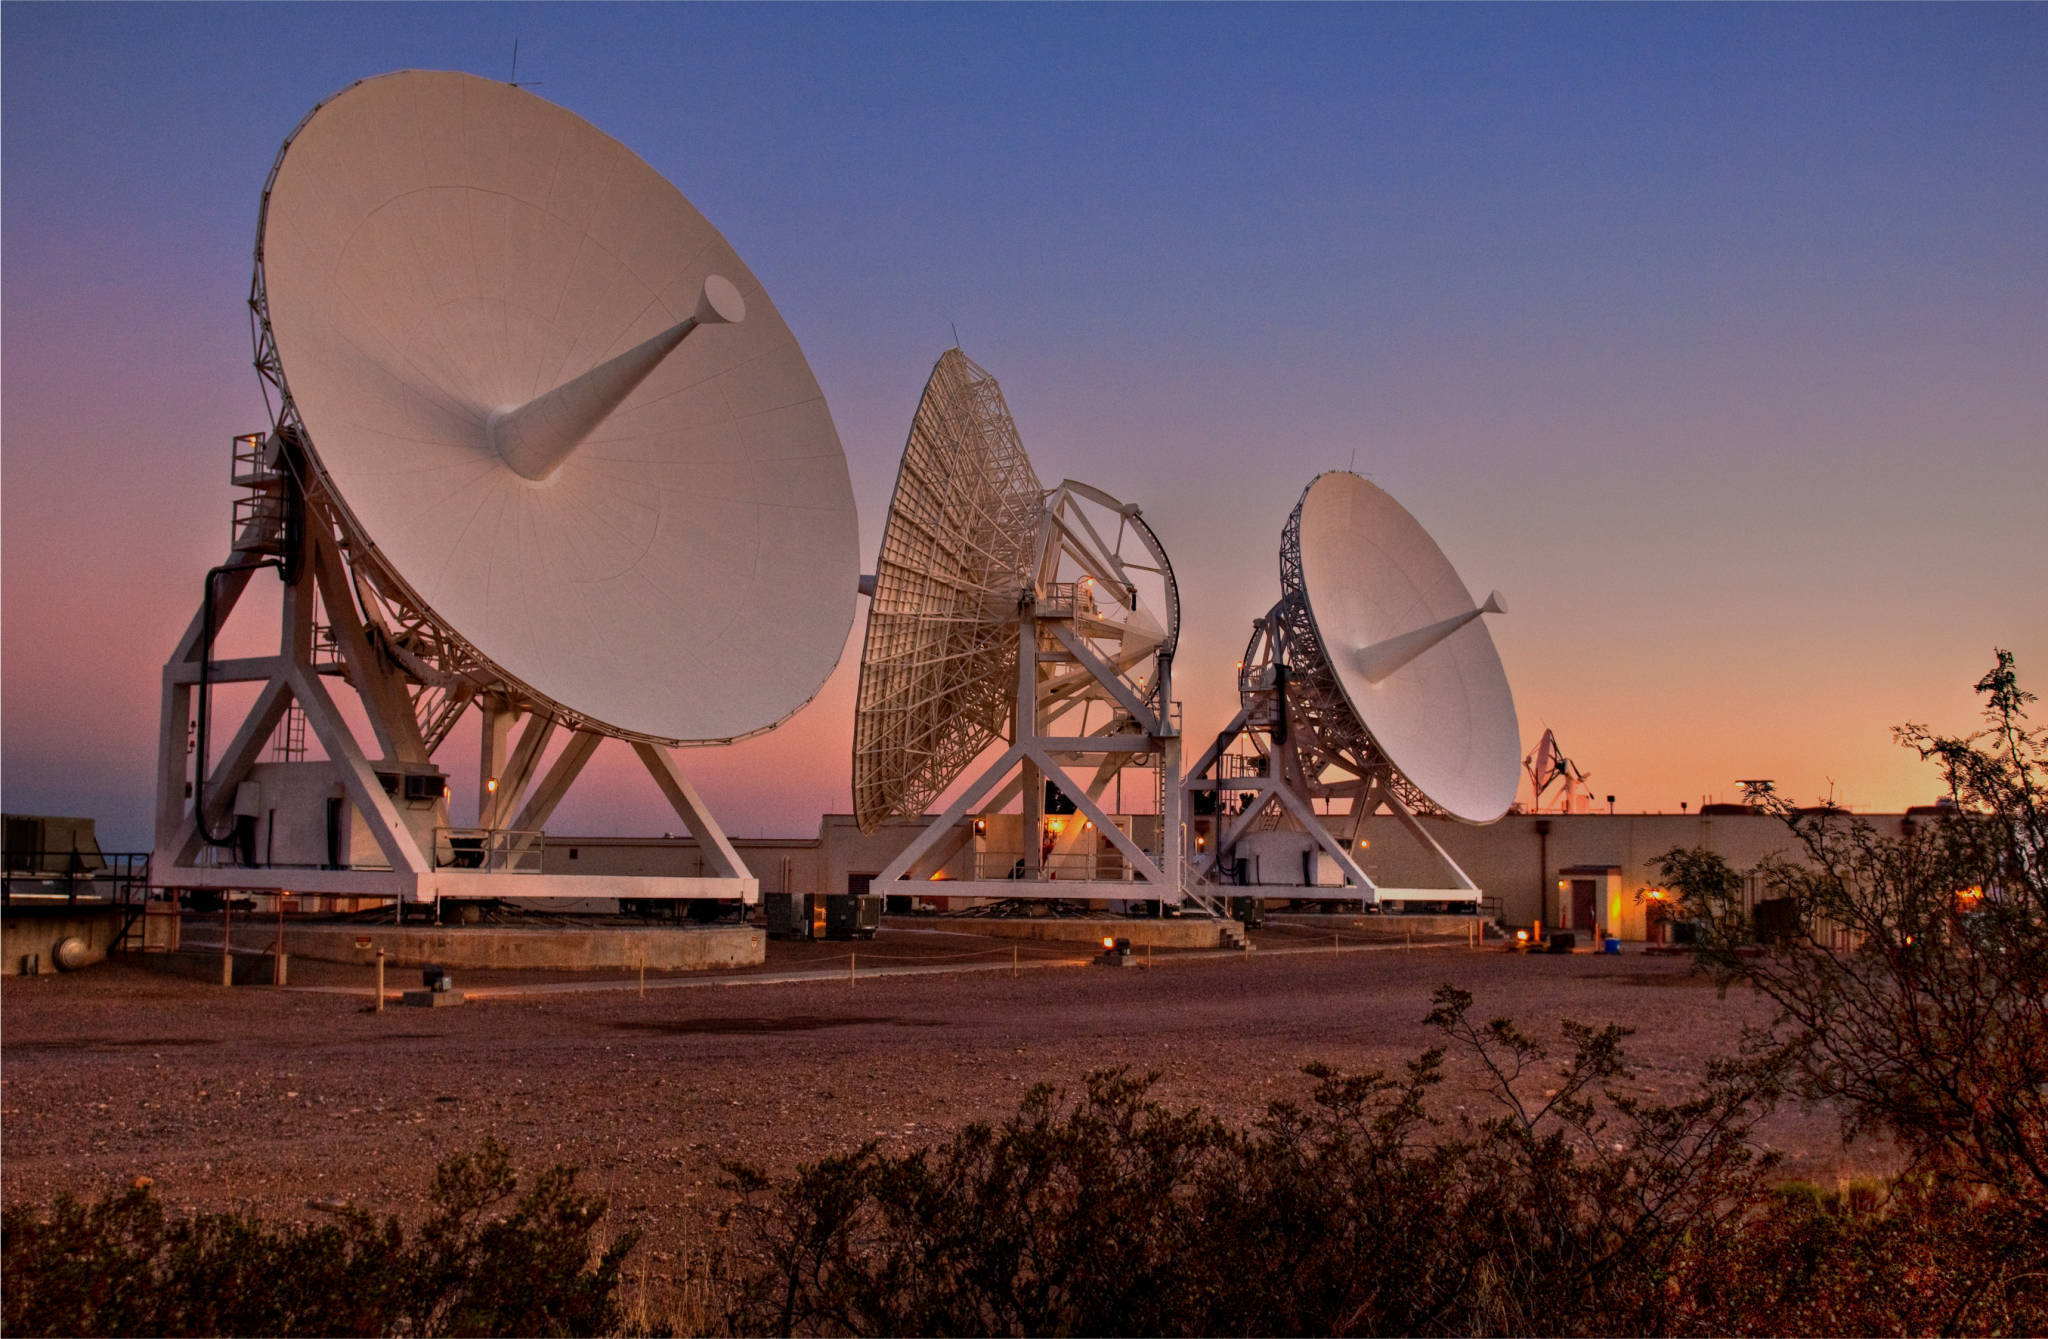 Three Near Space Network antennas can be seen in front of a rising Sun at the Second Tracking and Data Relay Satellite System (TDRSS) Ground Terminal.